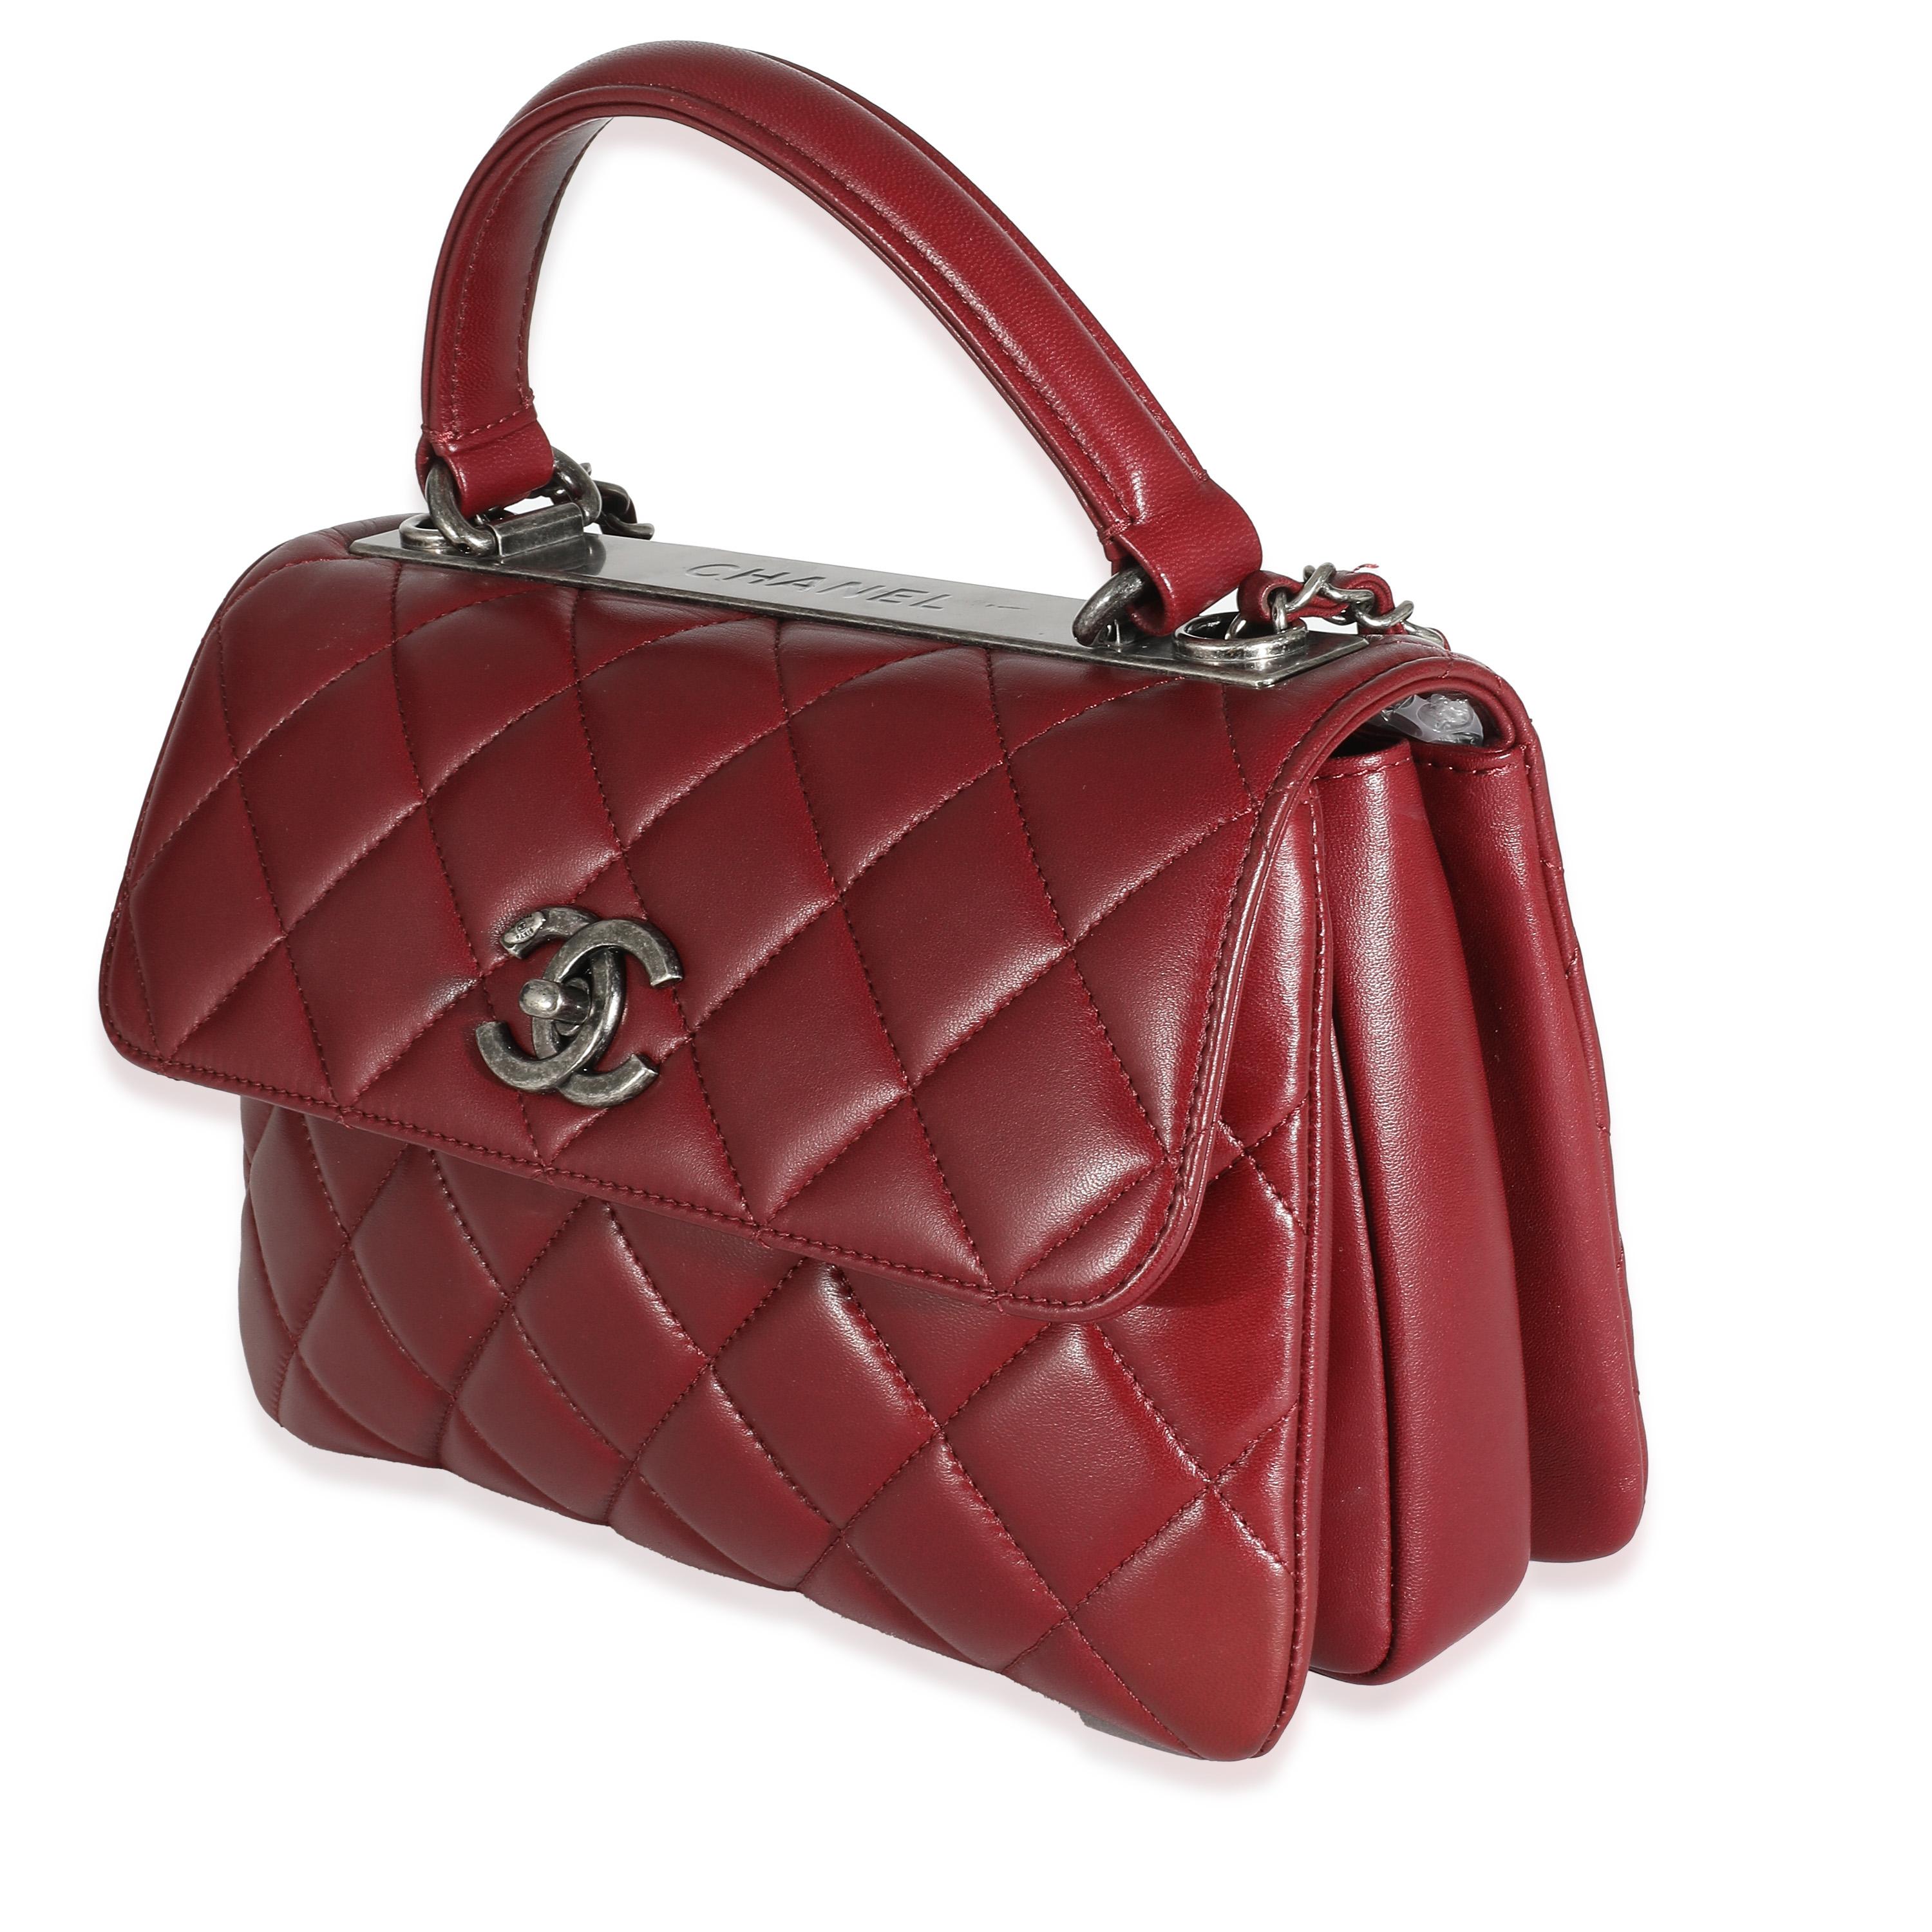 Chanel Burgundy Quilted Lambskin Small Trendy Flap Bag In Excellent Condition For Sale In New York, NY